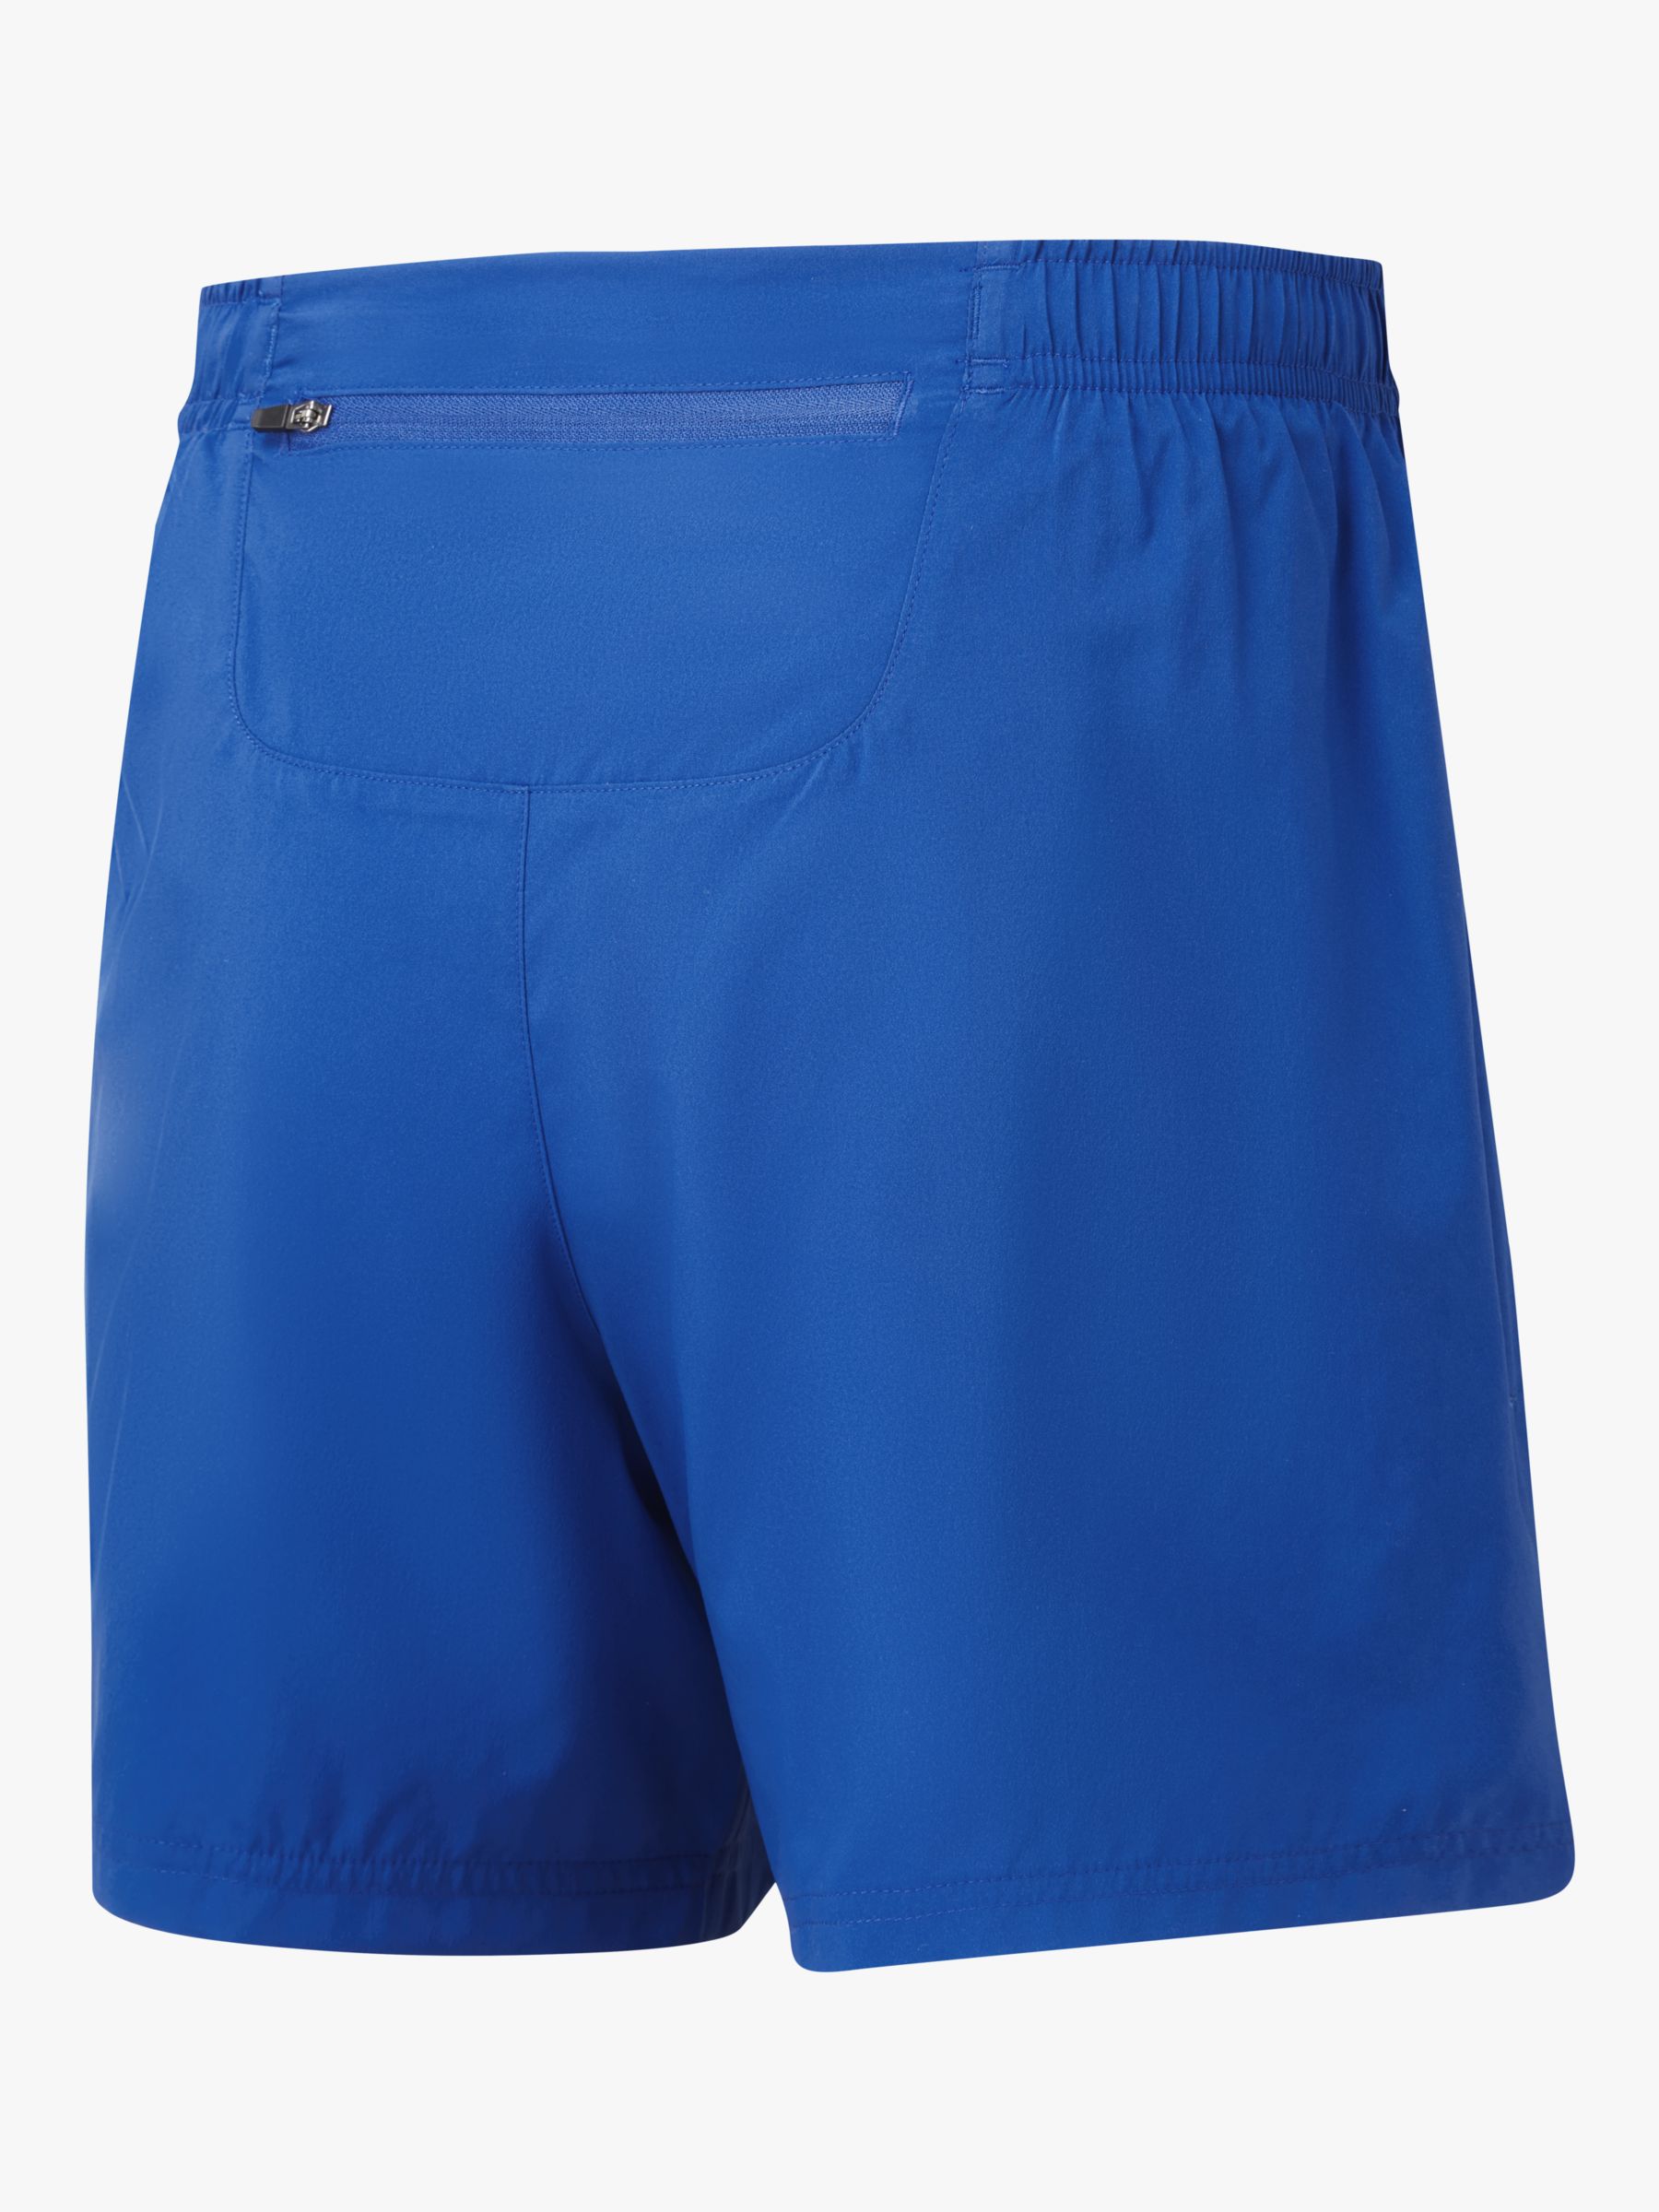 Ronhill Relaxed 5 inch Shorts, Blue, XL